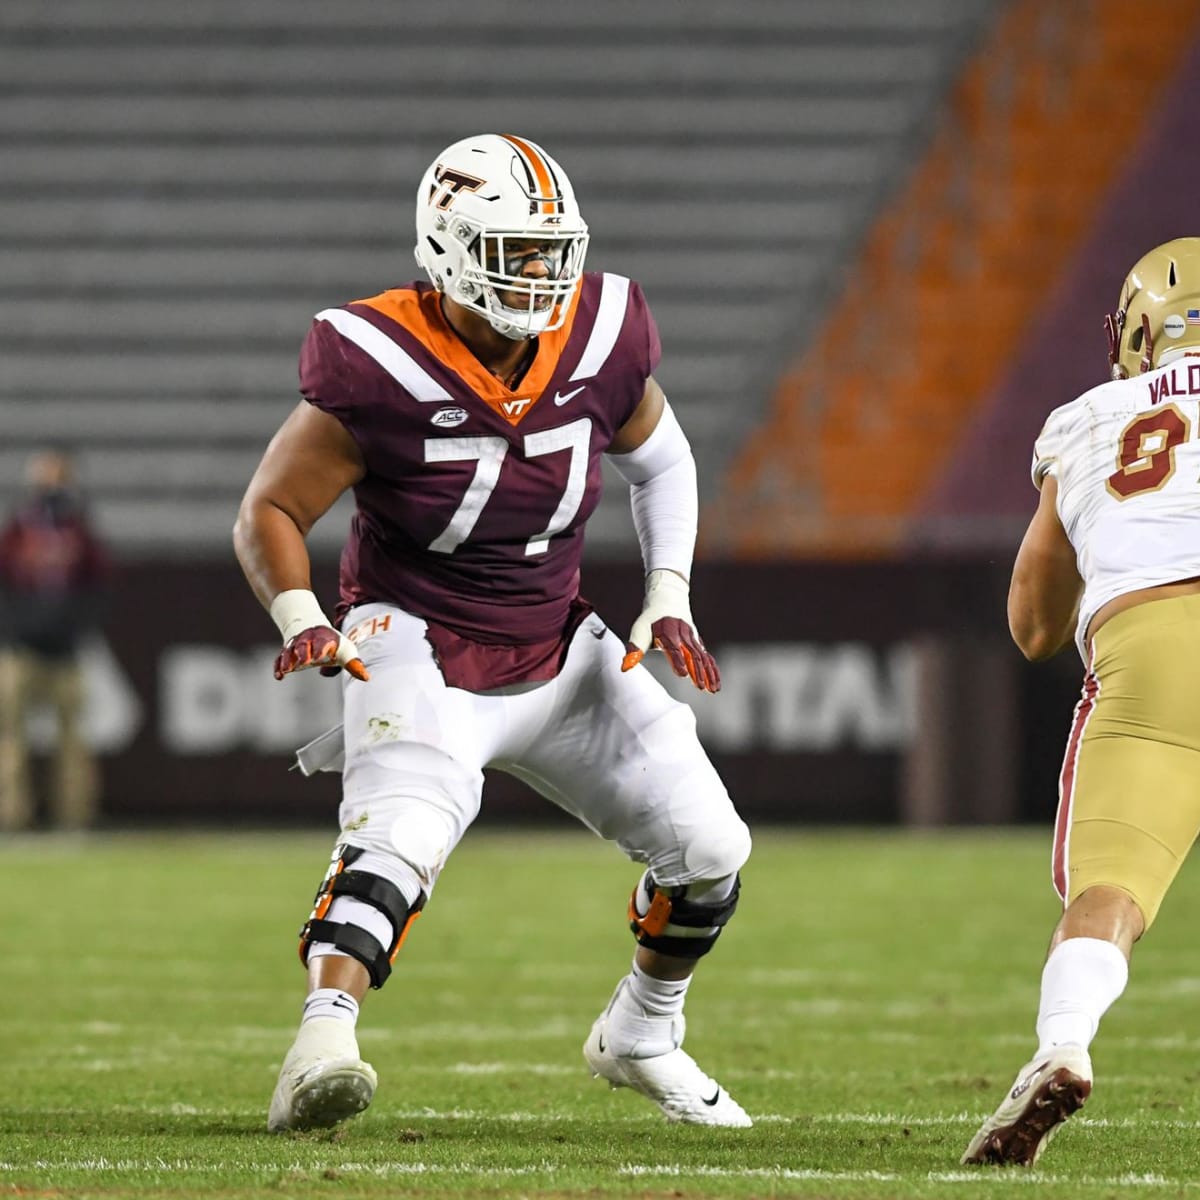 Virginia Tech tackle Christian Darrisaw vaults up draft boards playing  through pandemic